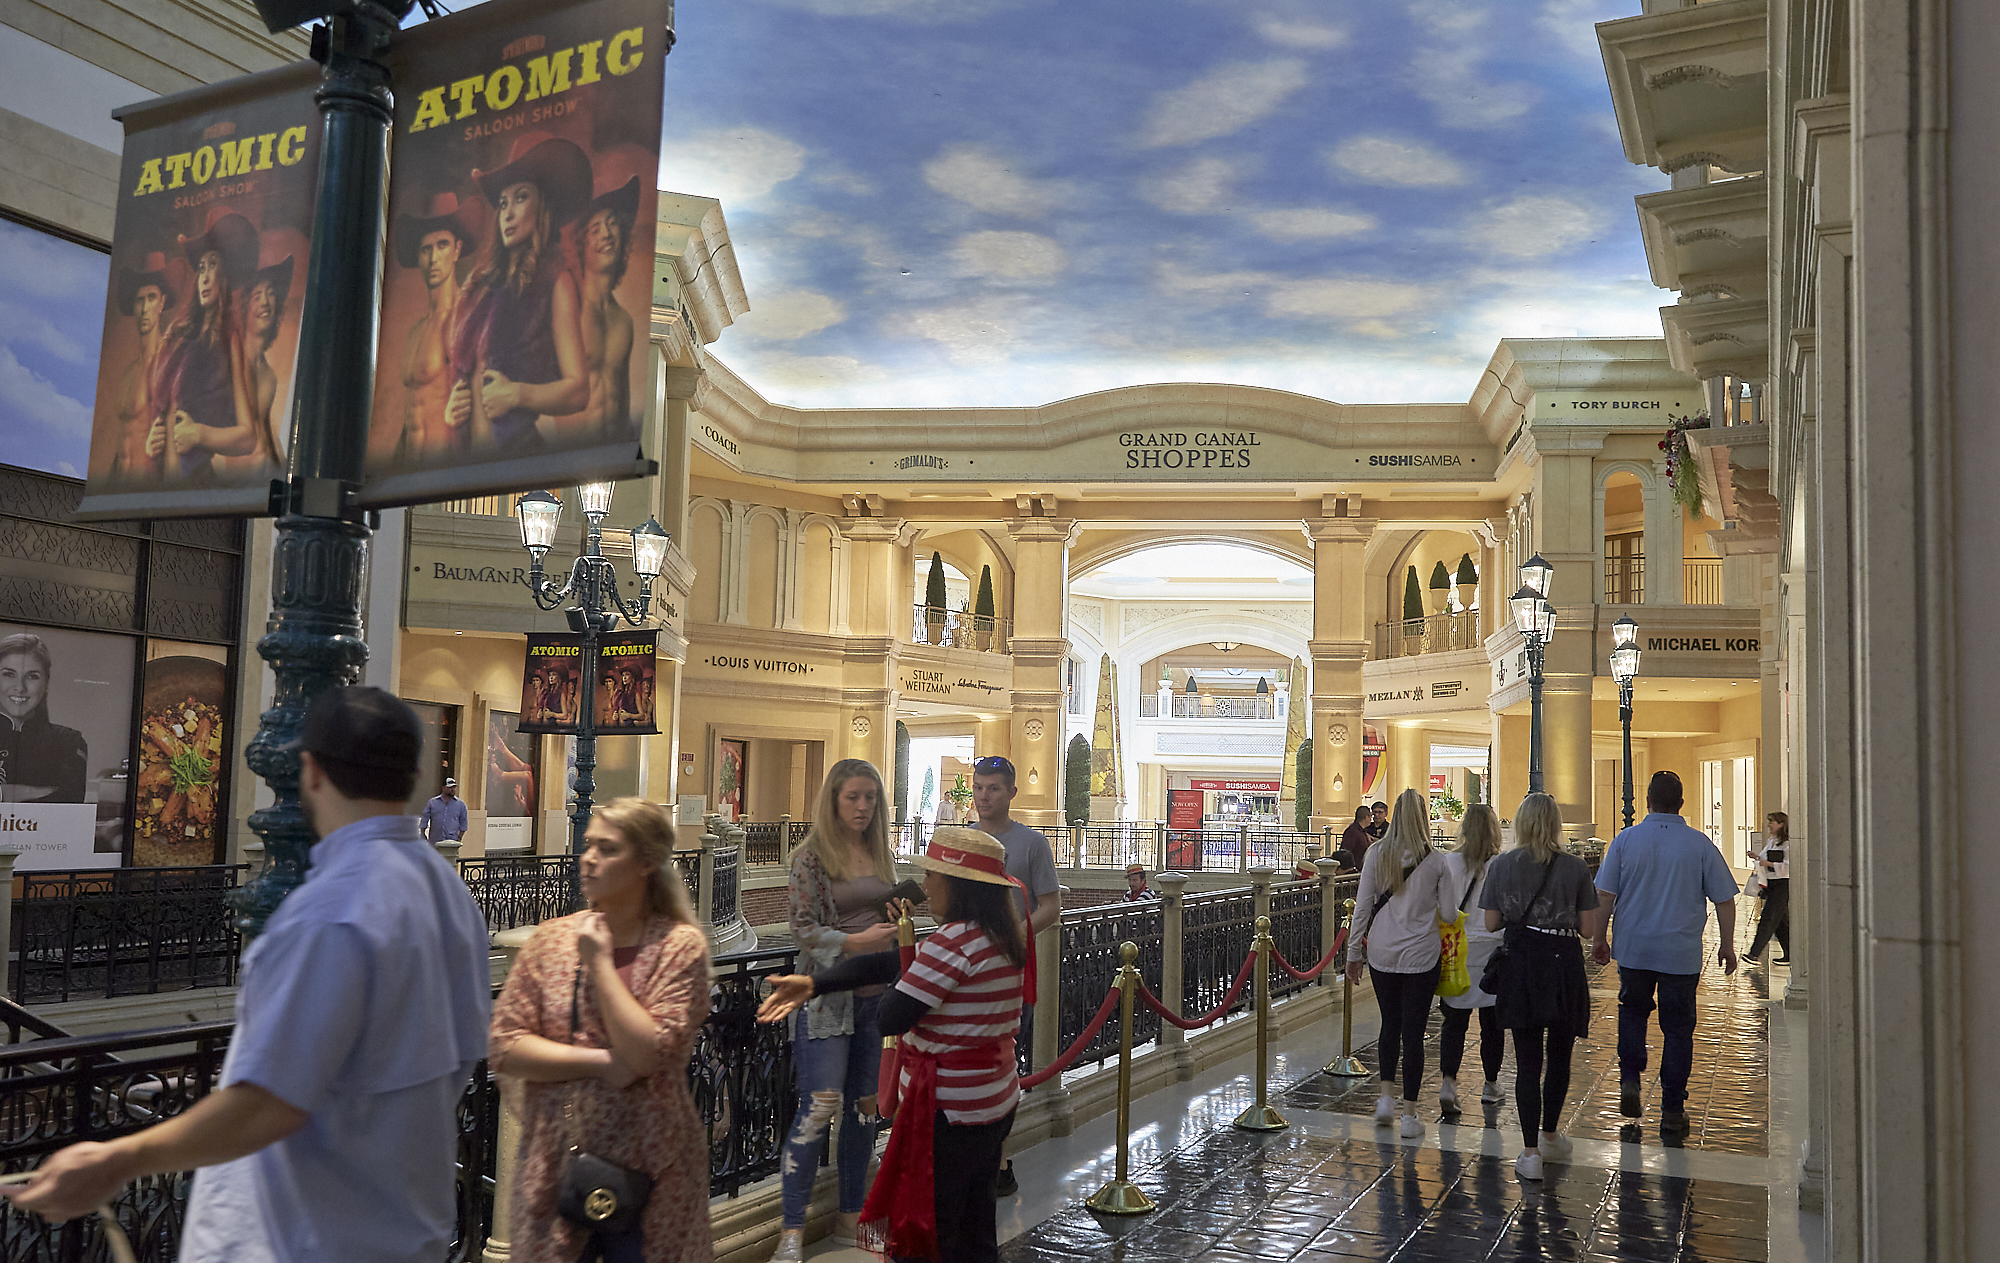 Ad Art Sign Co., AdArt, Full Service Signage, LED Lighting, Digital Signage,Hospitality, Signage, Retail, Custom Printed promotional pole signs and Halo-lit pin mounted FCO (Flat Cut Out) Metal Letters, The Venetian Resort & Casino, Las Vegas, NV